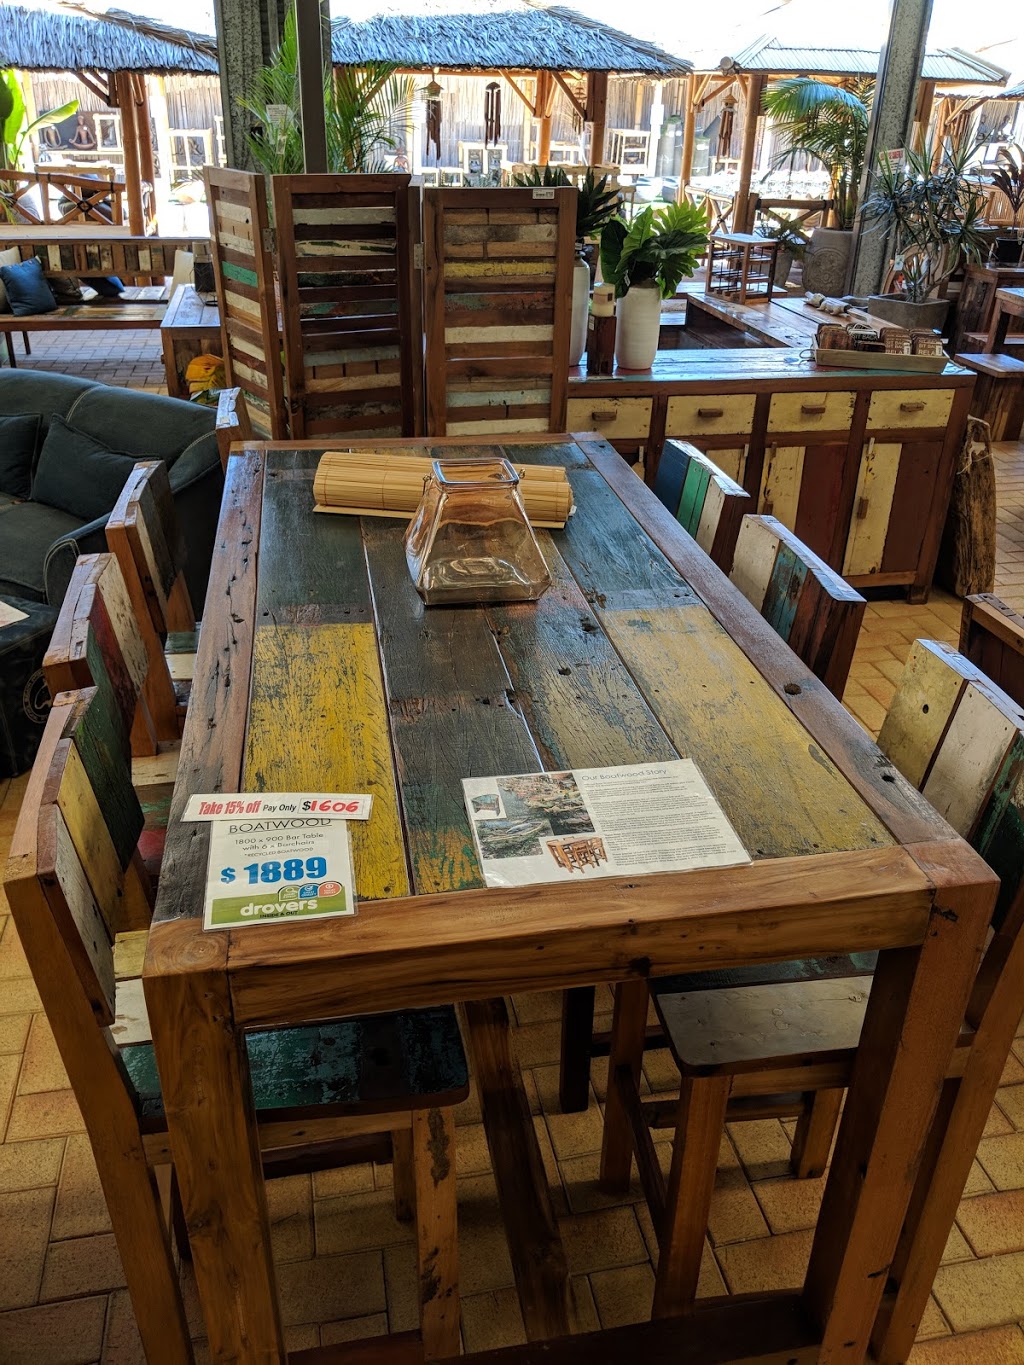 Drovers Inside & Out | furniture store | 1387 Wanneroo Rd, Wanneroo WA 6065, Australia | 0892064644 OR +61 8 9206 4644